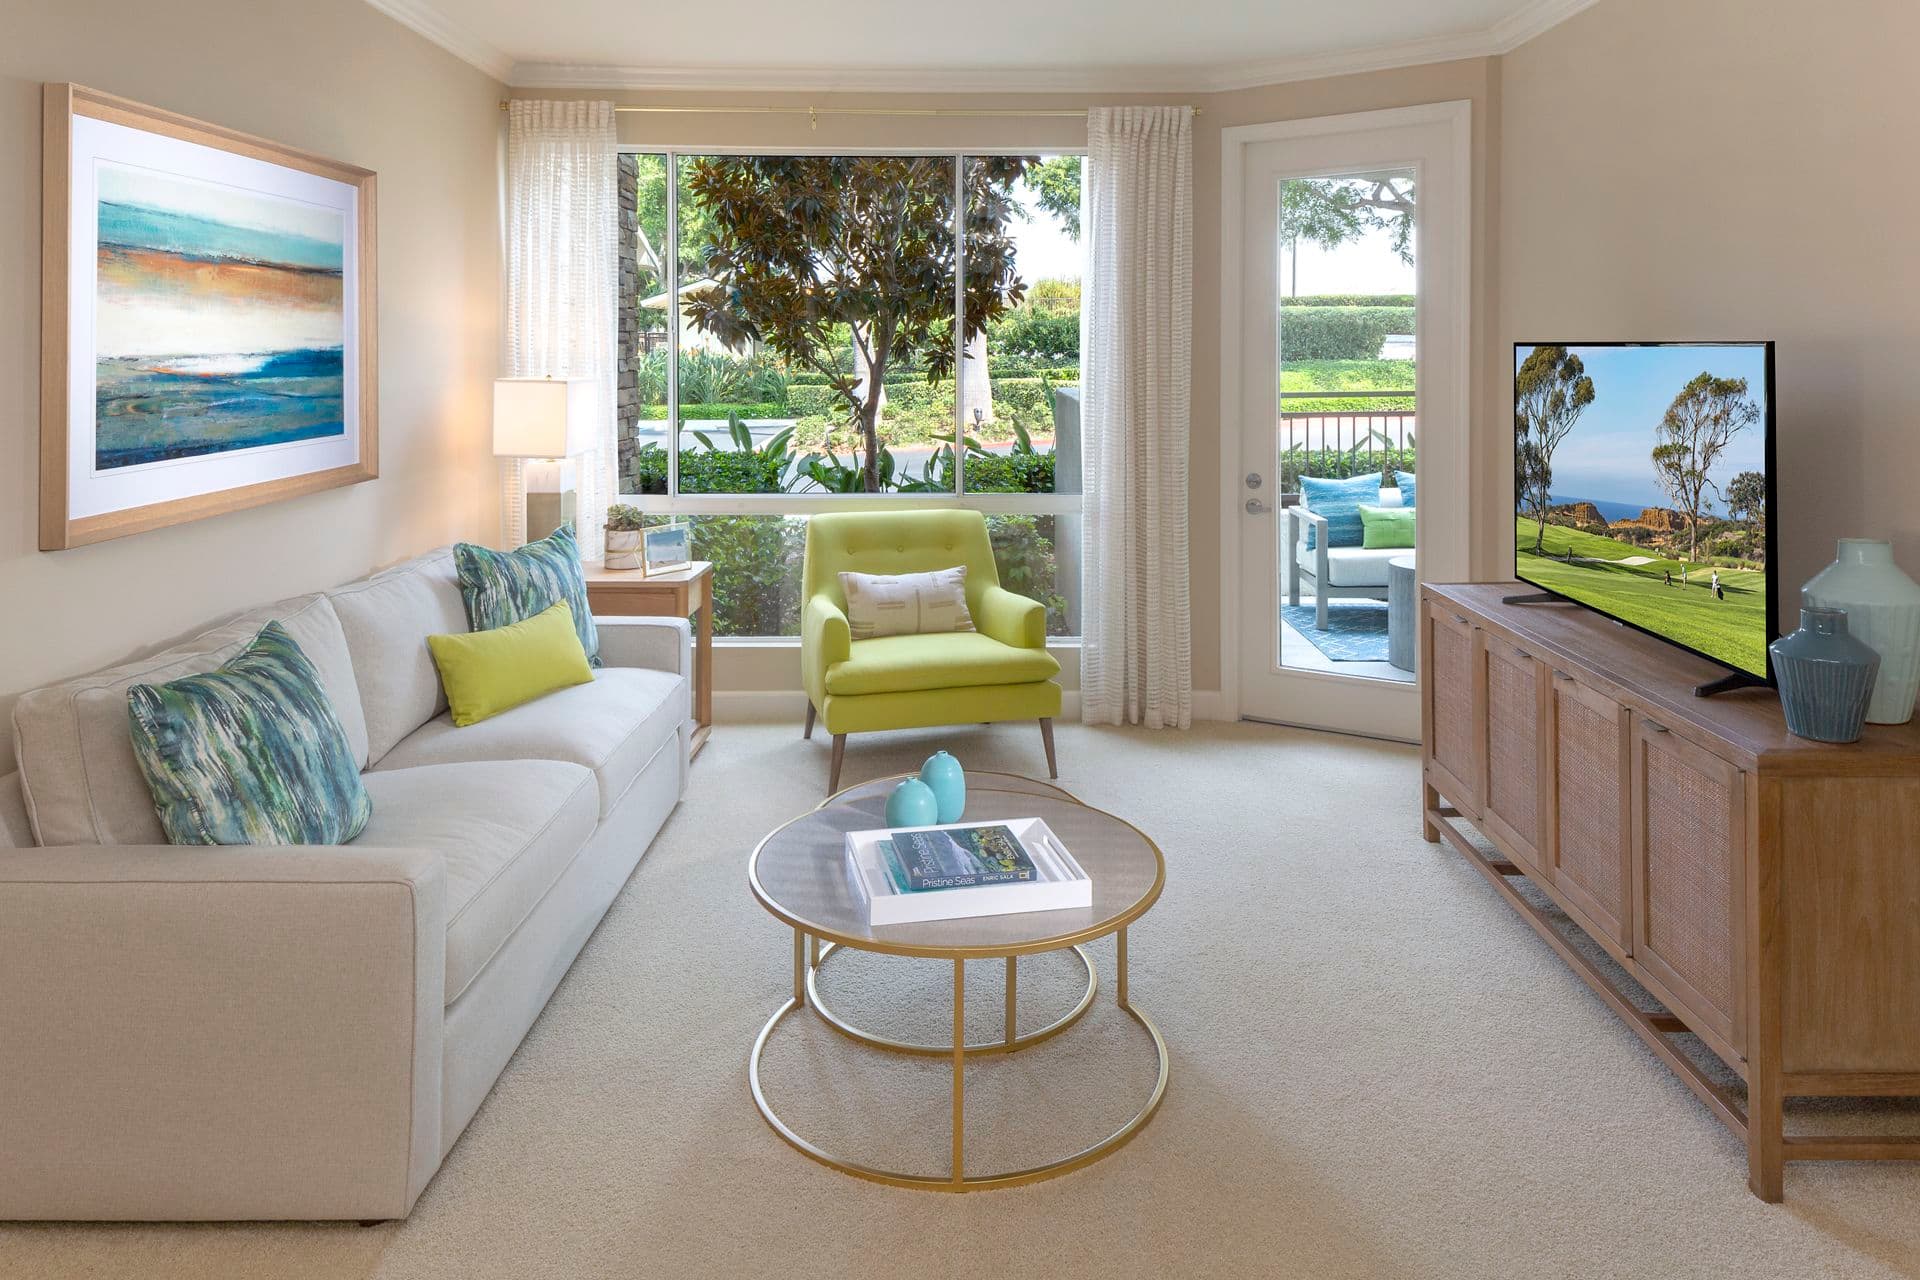 Interior view of living room at Marbella Apartment Homes in San Diego, CA.